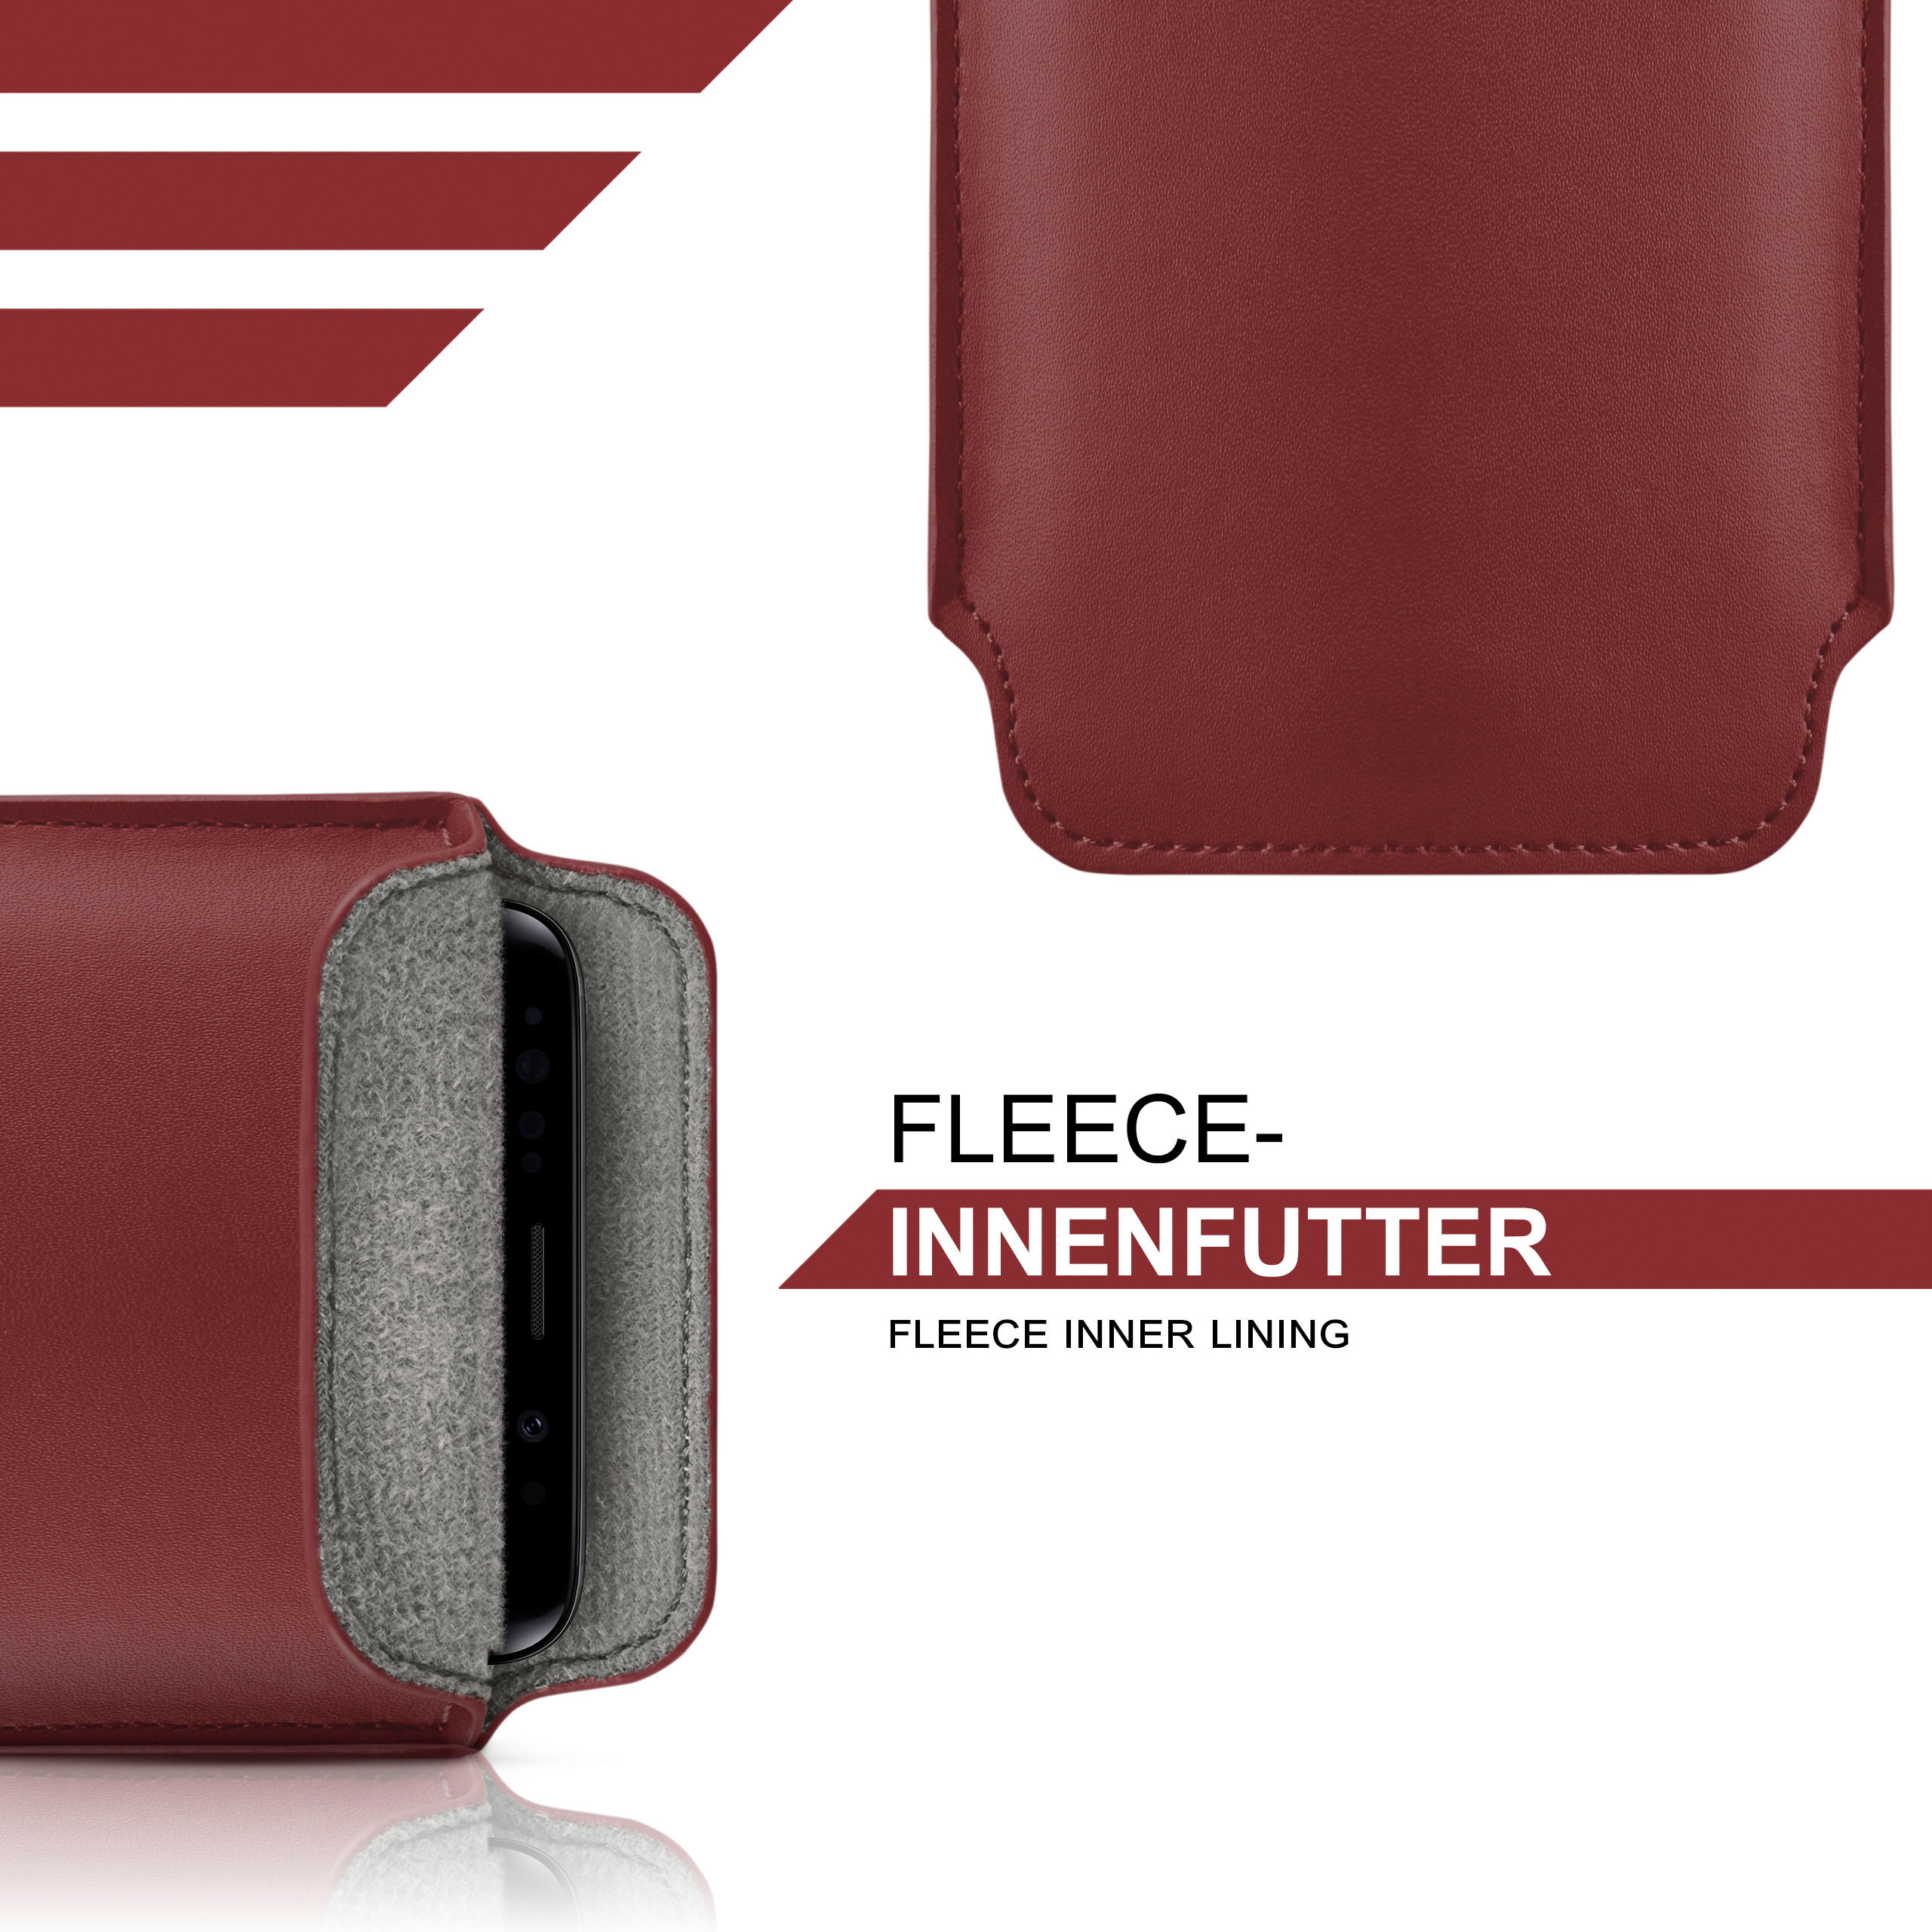 MOEX Slide Case, Full Cover, Arc Xperia Sony, Maroon-Red S, Ericsson